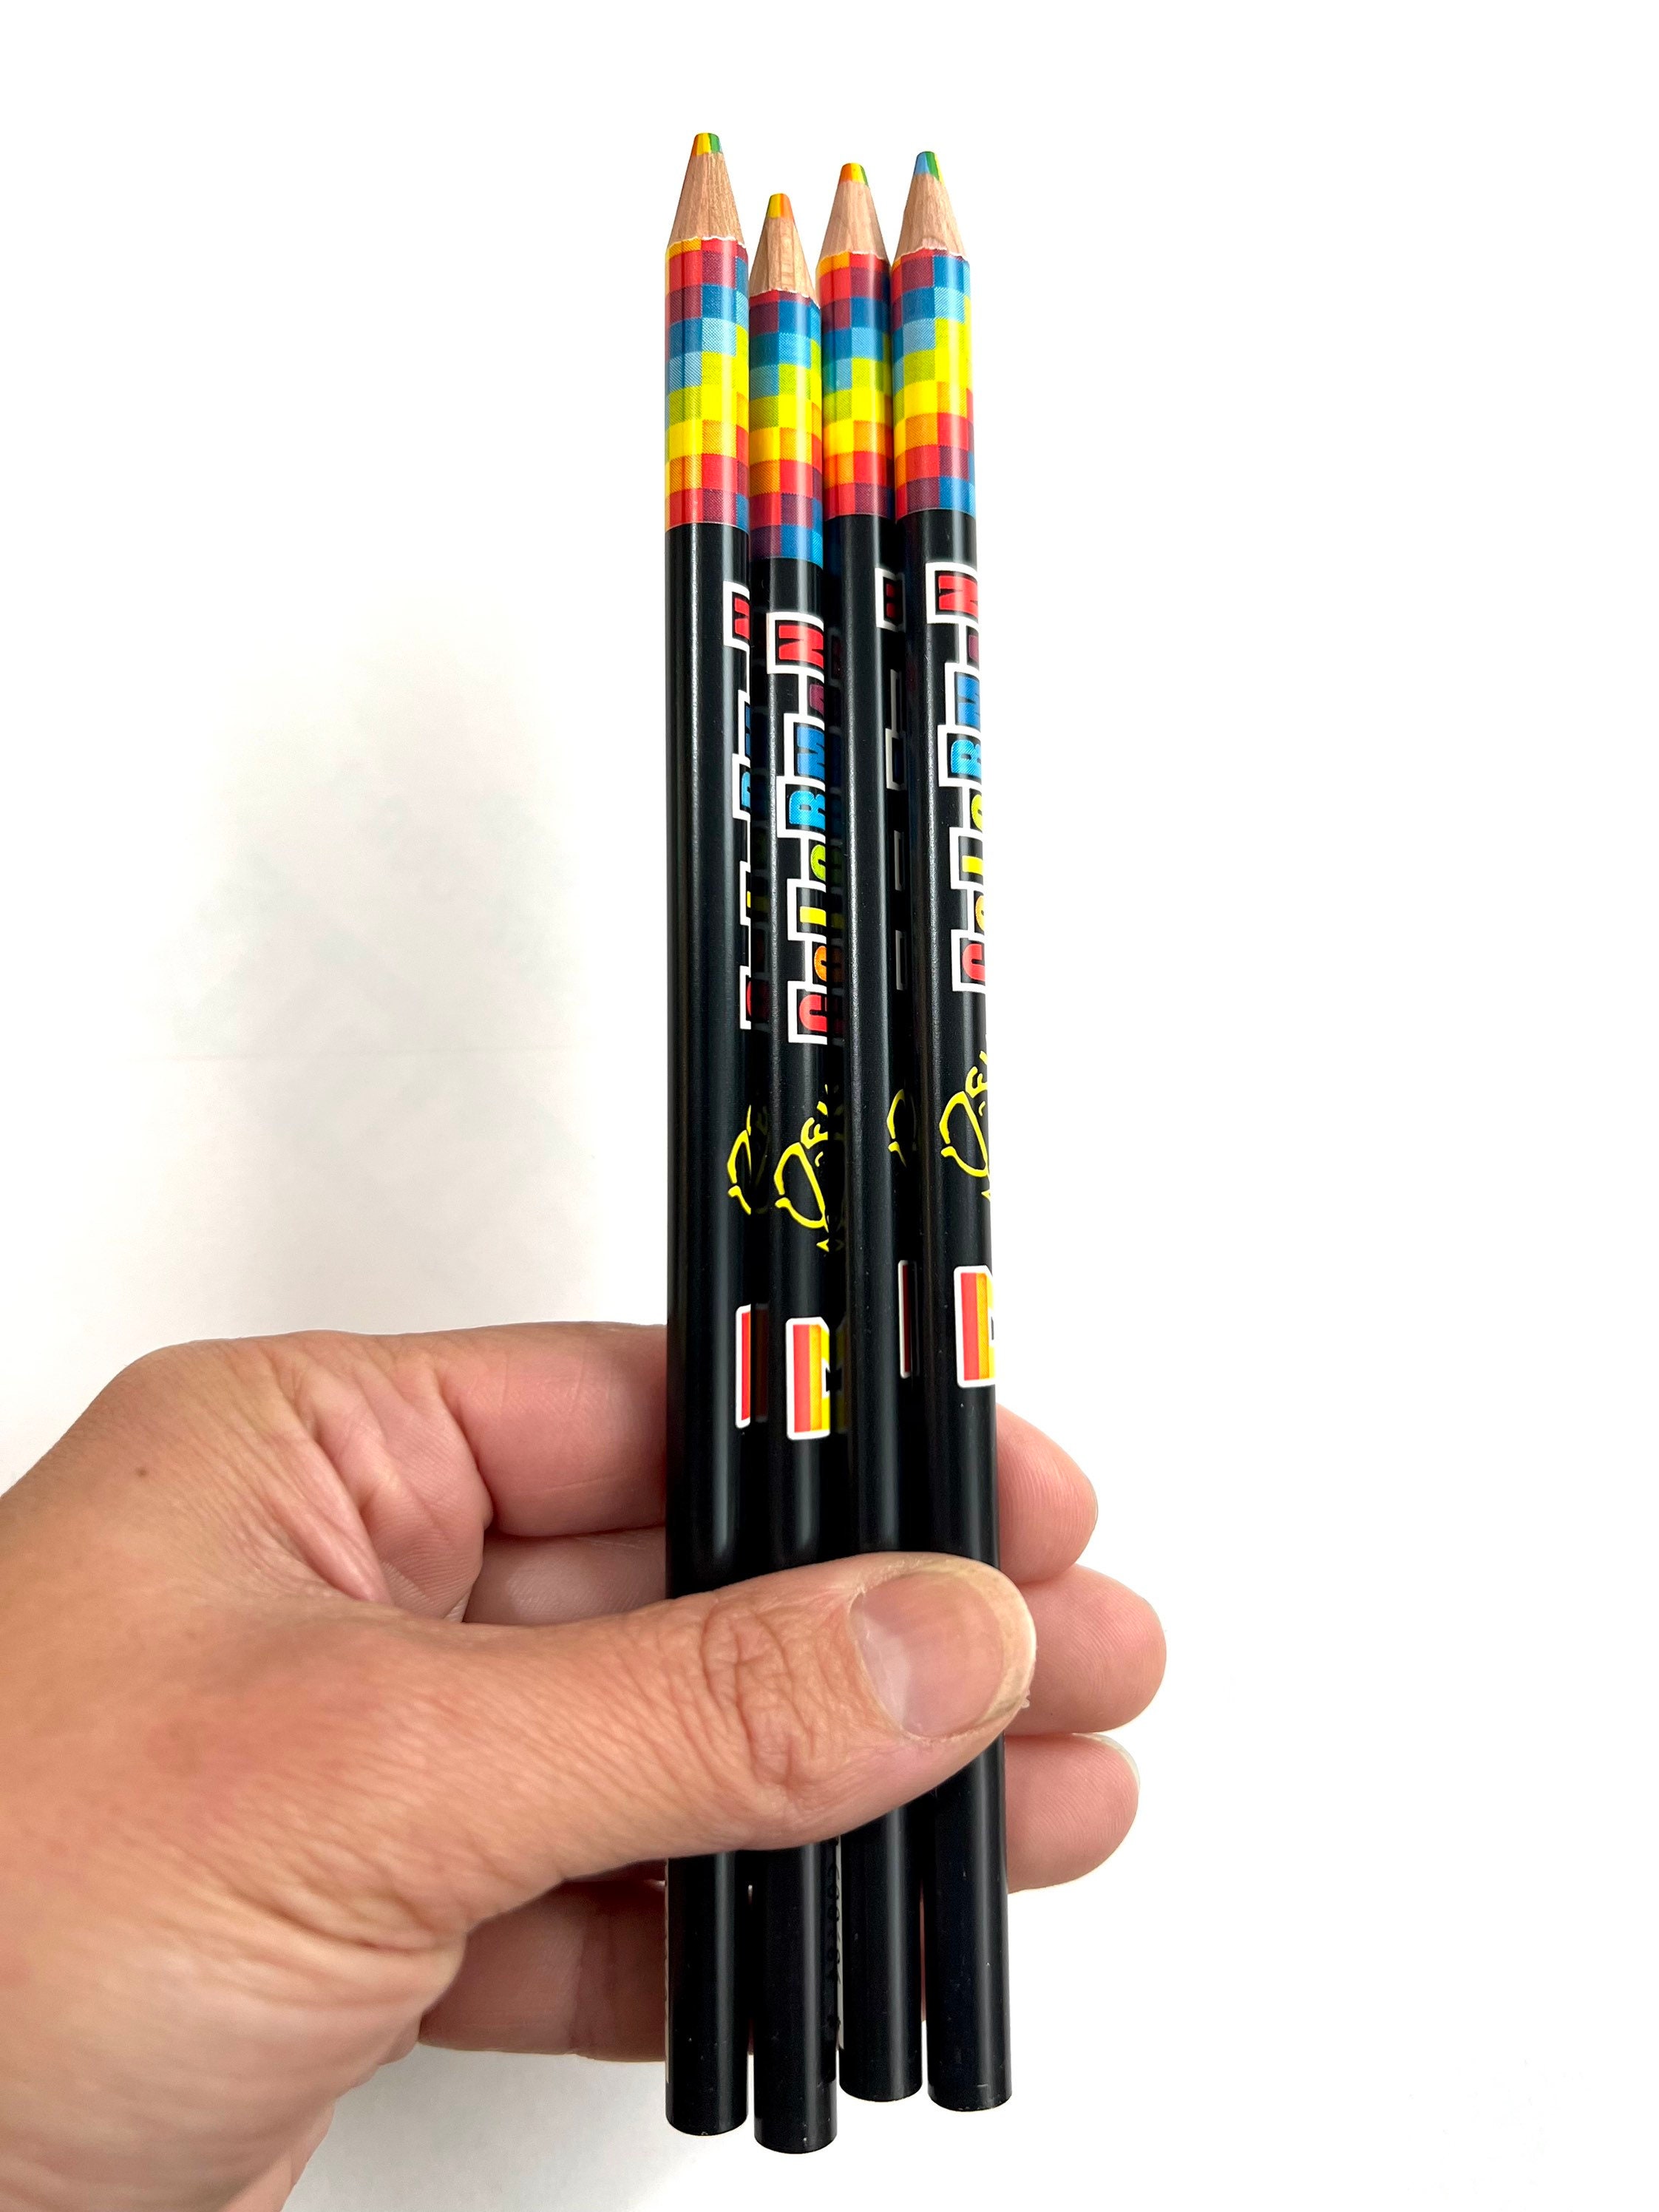 Mr. Pen- Rainbow Pencils, 12 Colors, 7 Color in 1 Rainbow Colored Pencil  with Sharpener, Fun Pencils for Kids